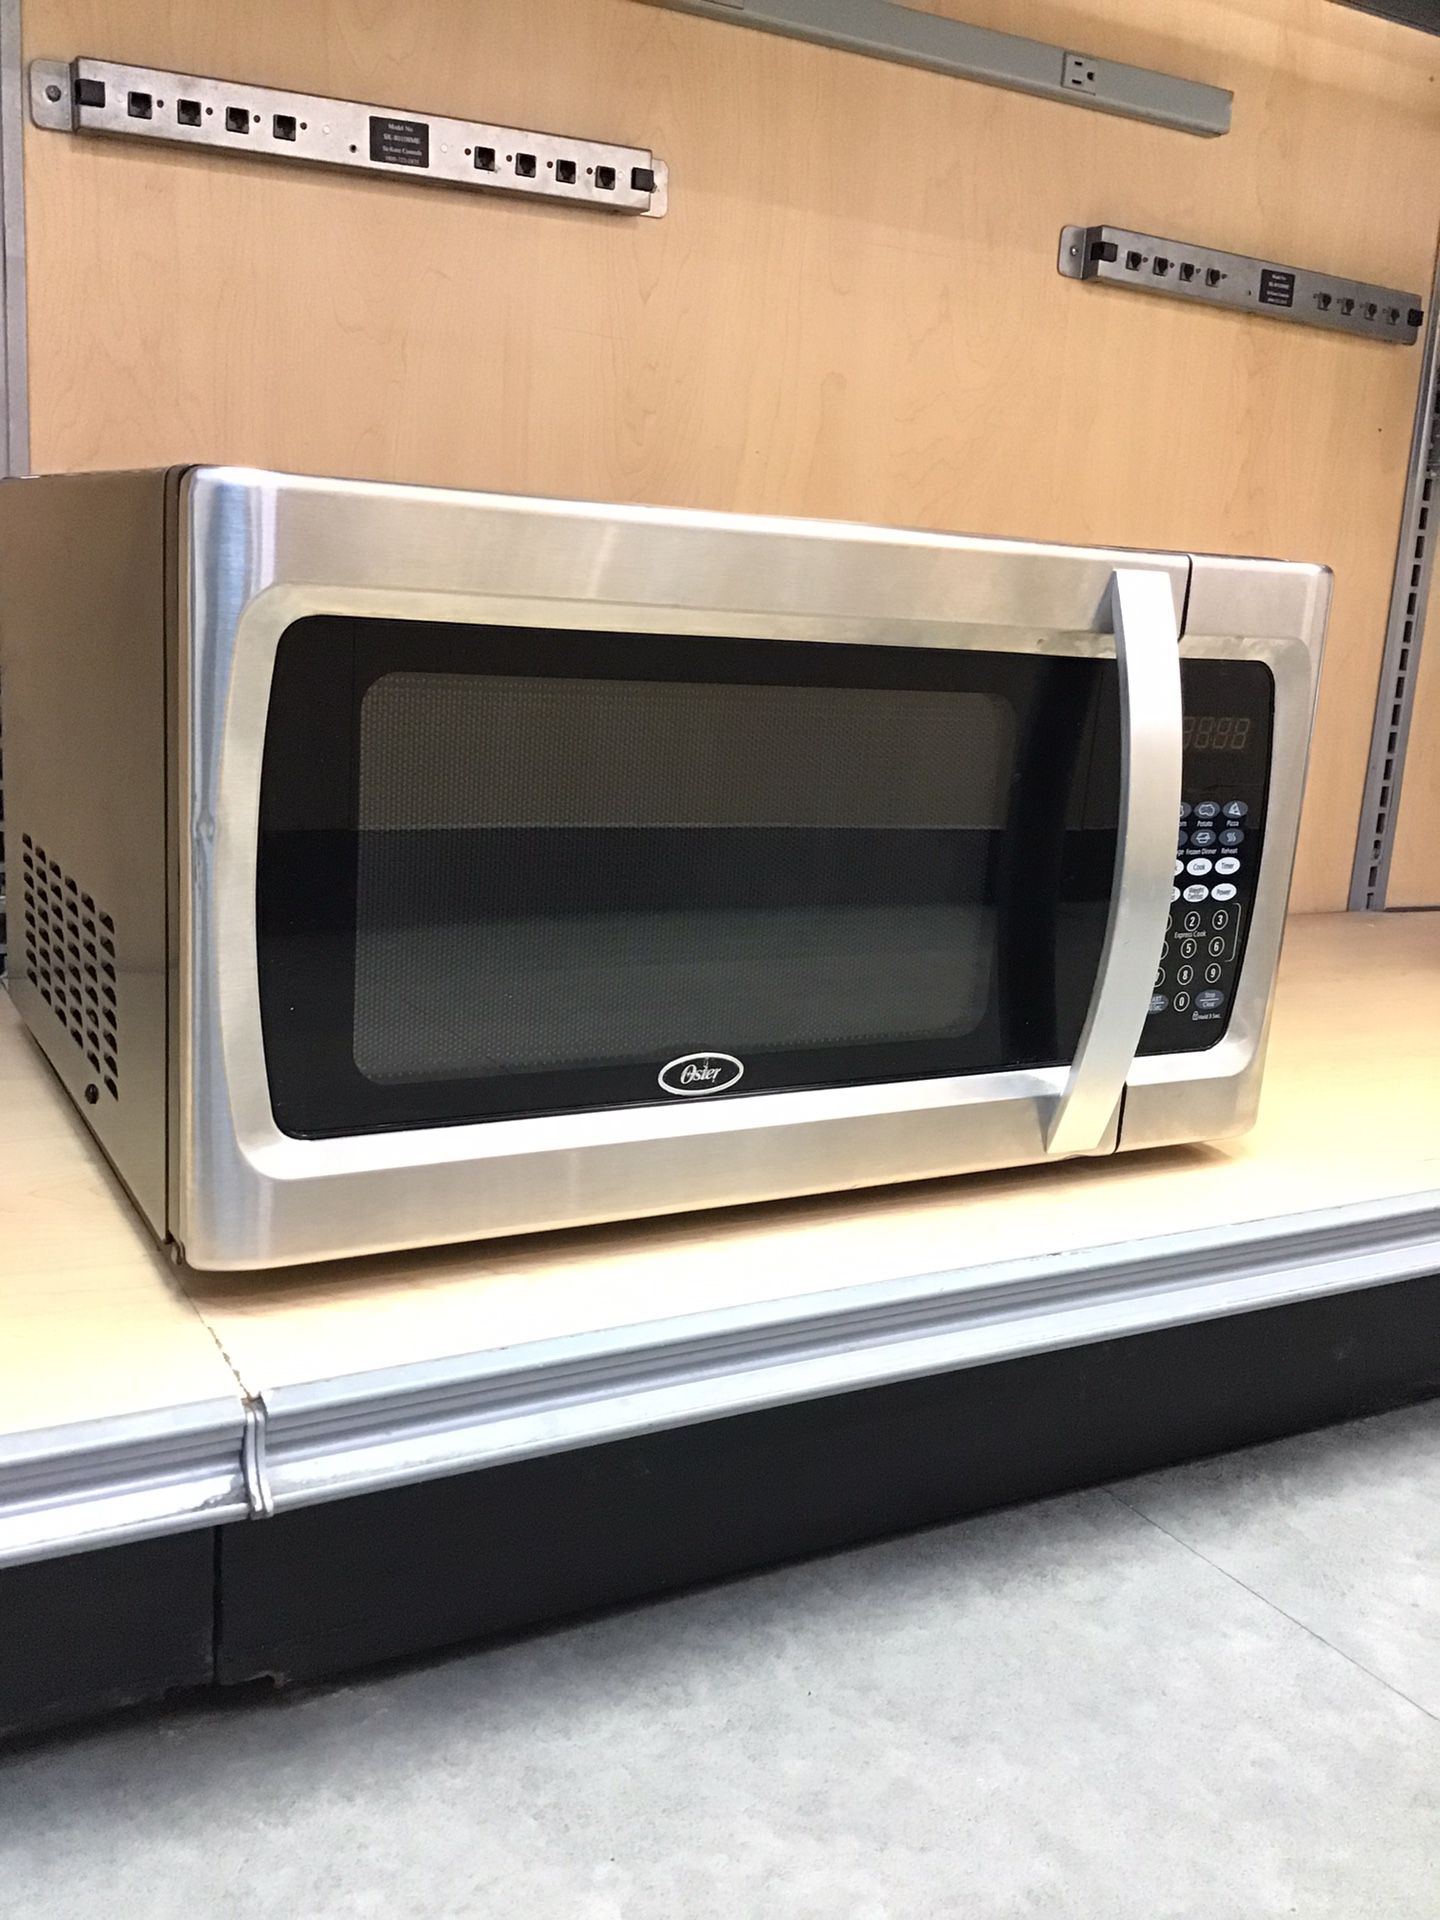 Oster Microwave Oven. for Sale in Long Beach, CA - OfferUp